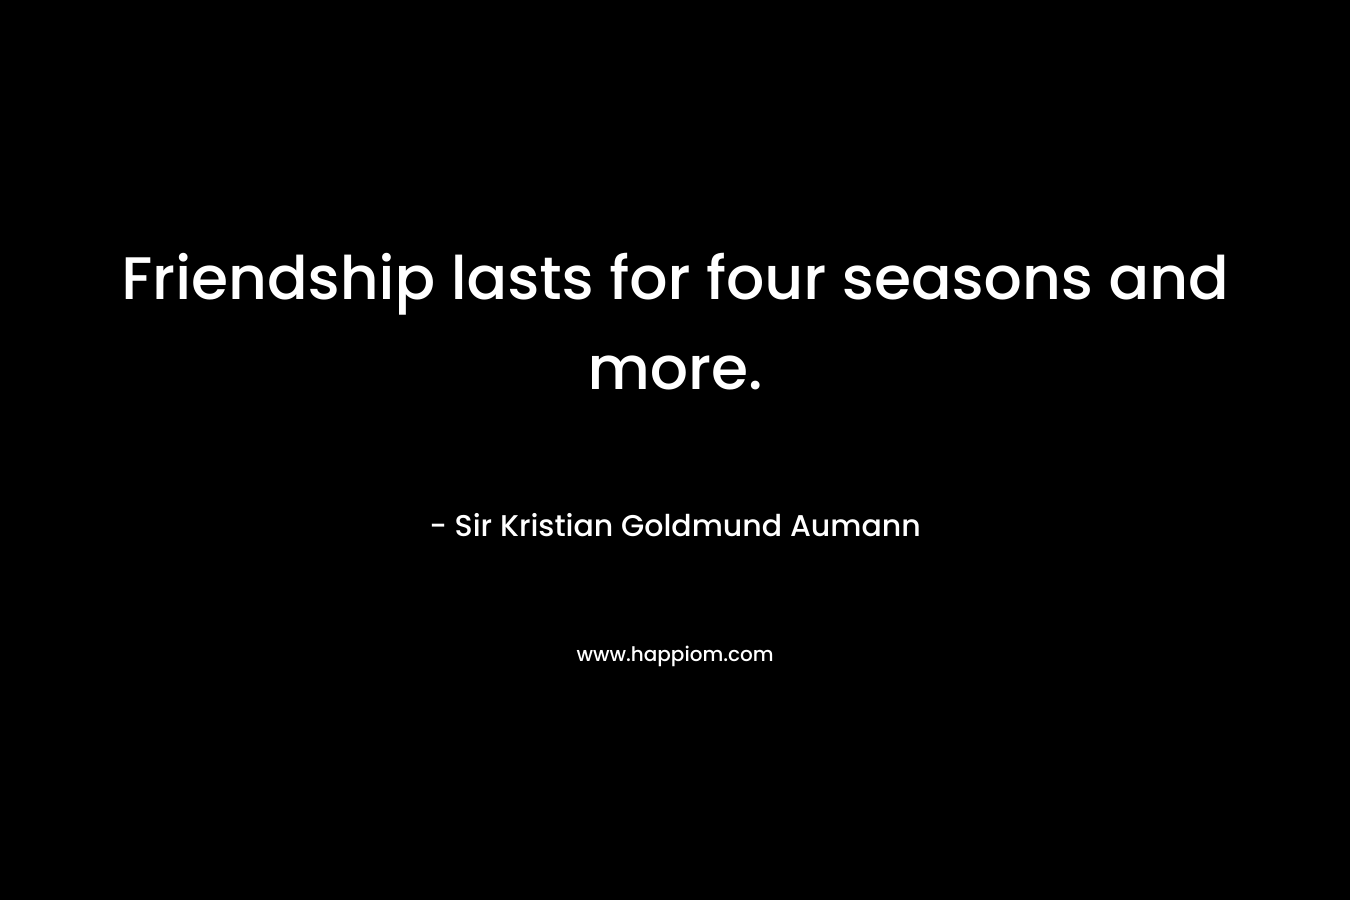 Friendship lasts for four seasons and more.